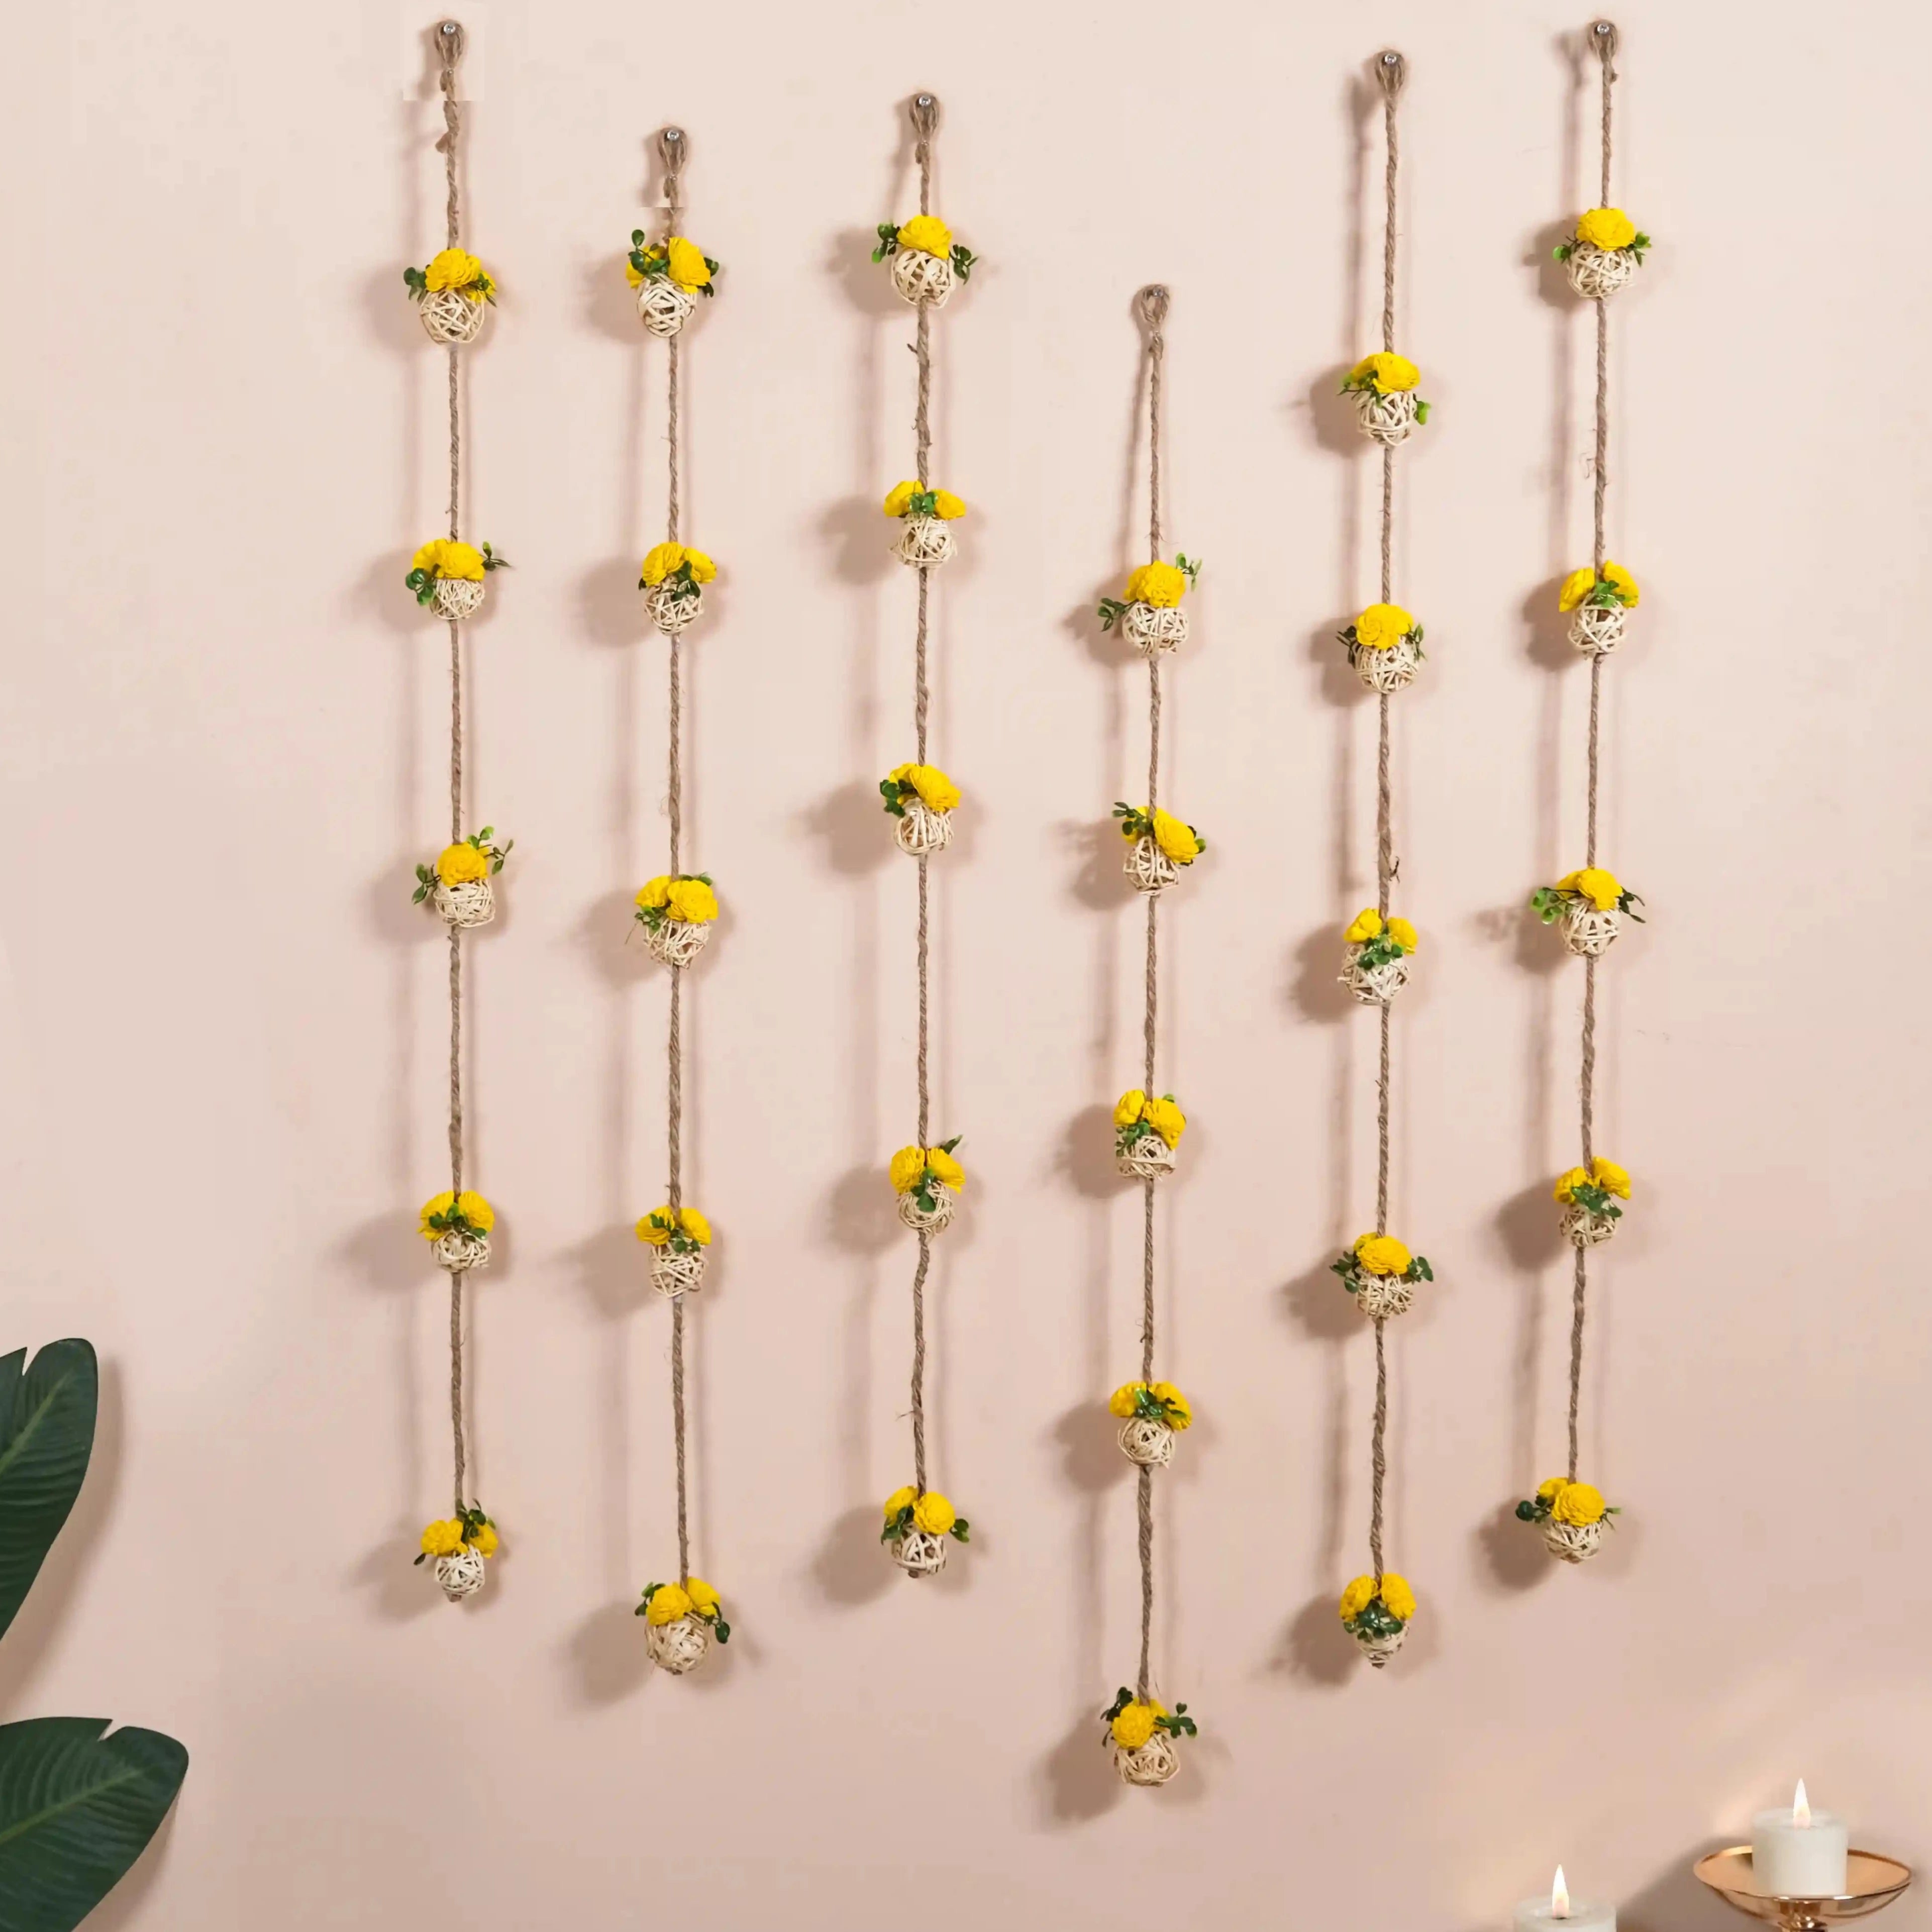 Turn a pack of hangers into jaw dropping decor! 